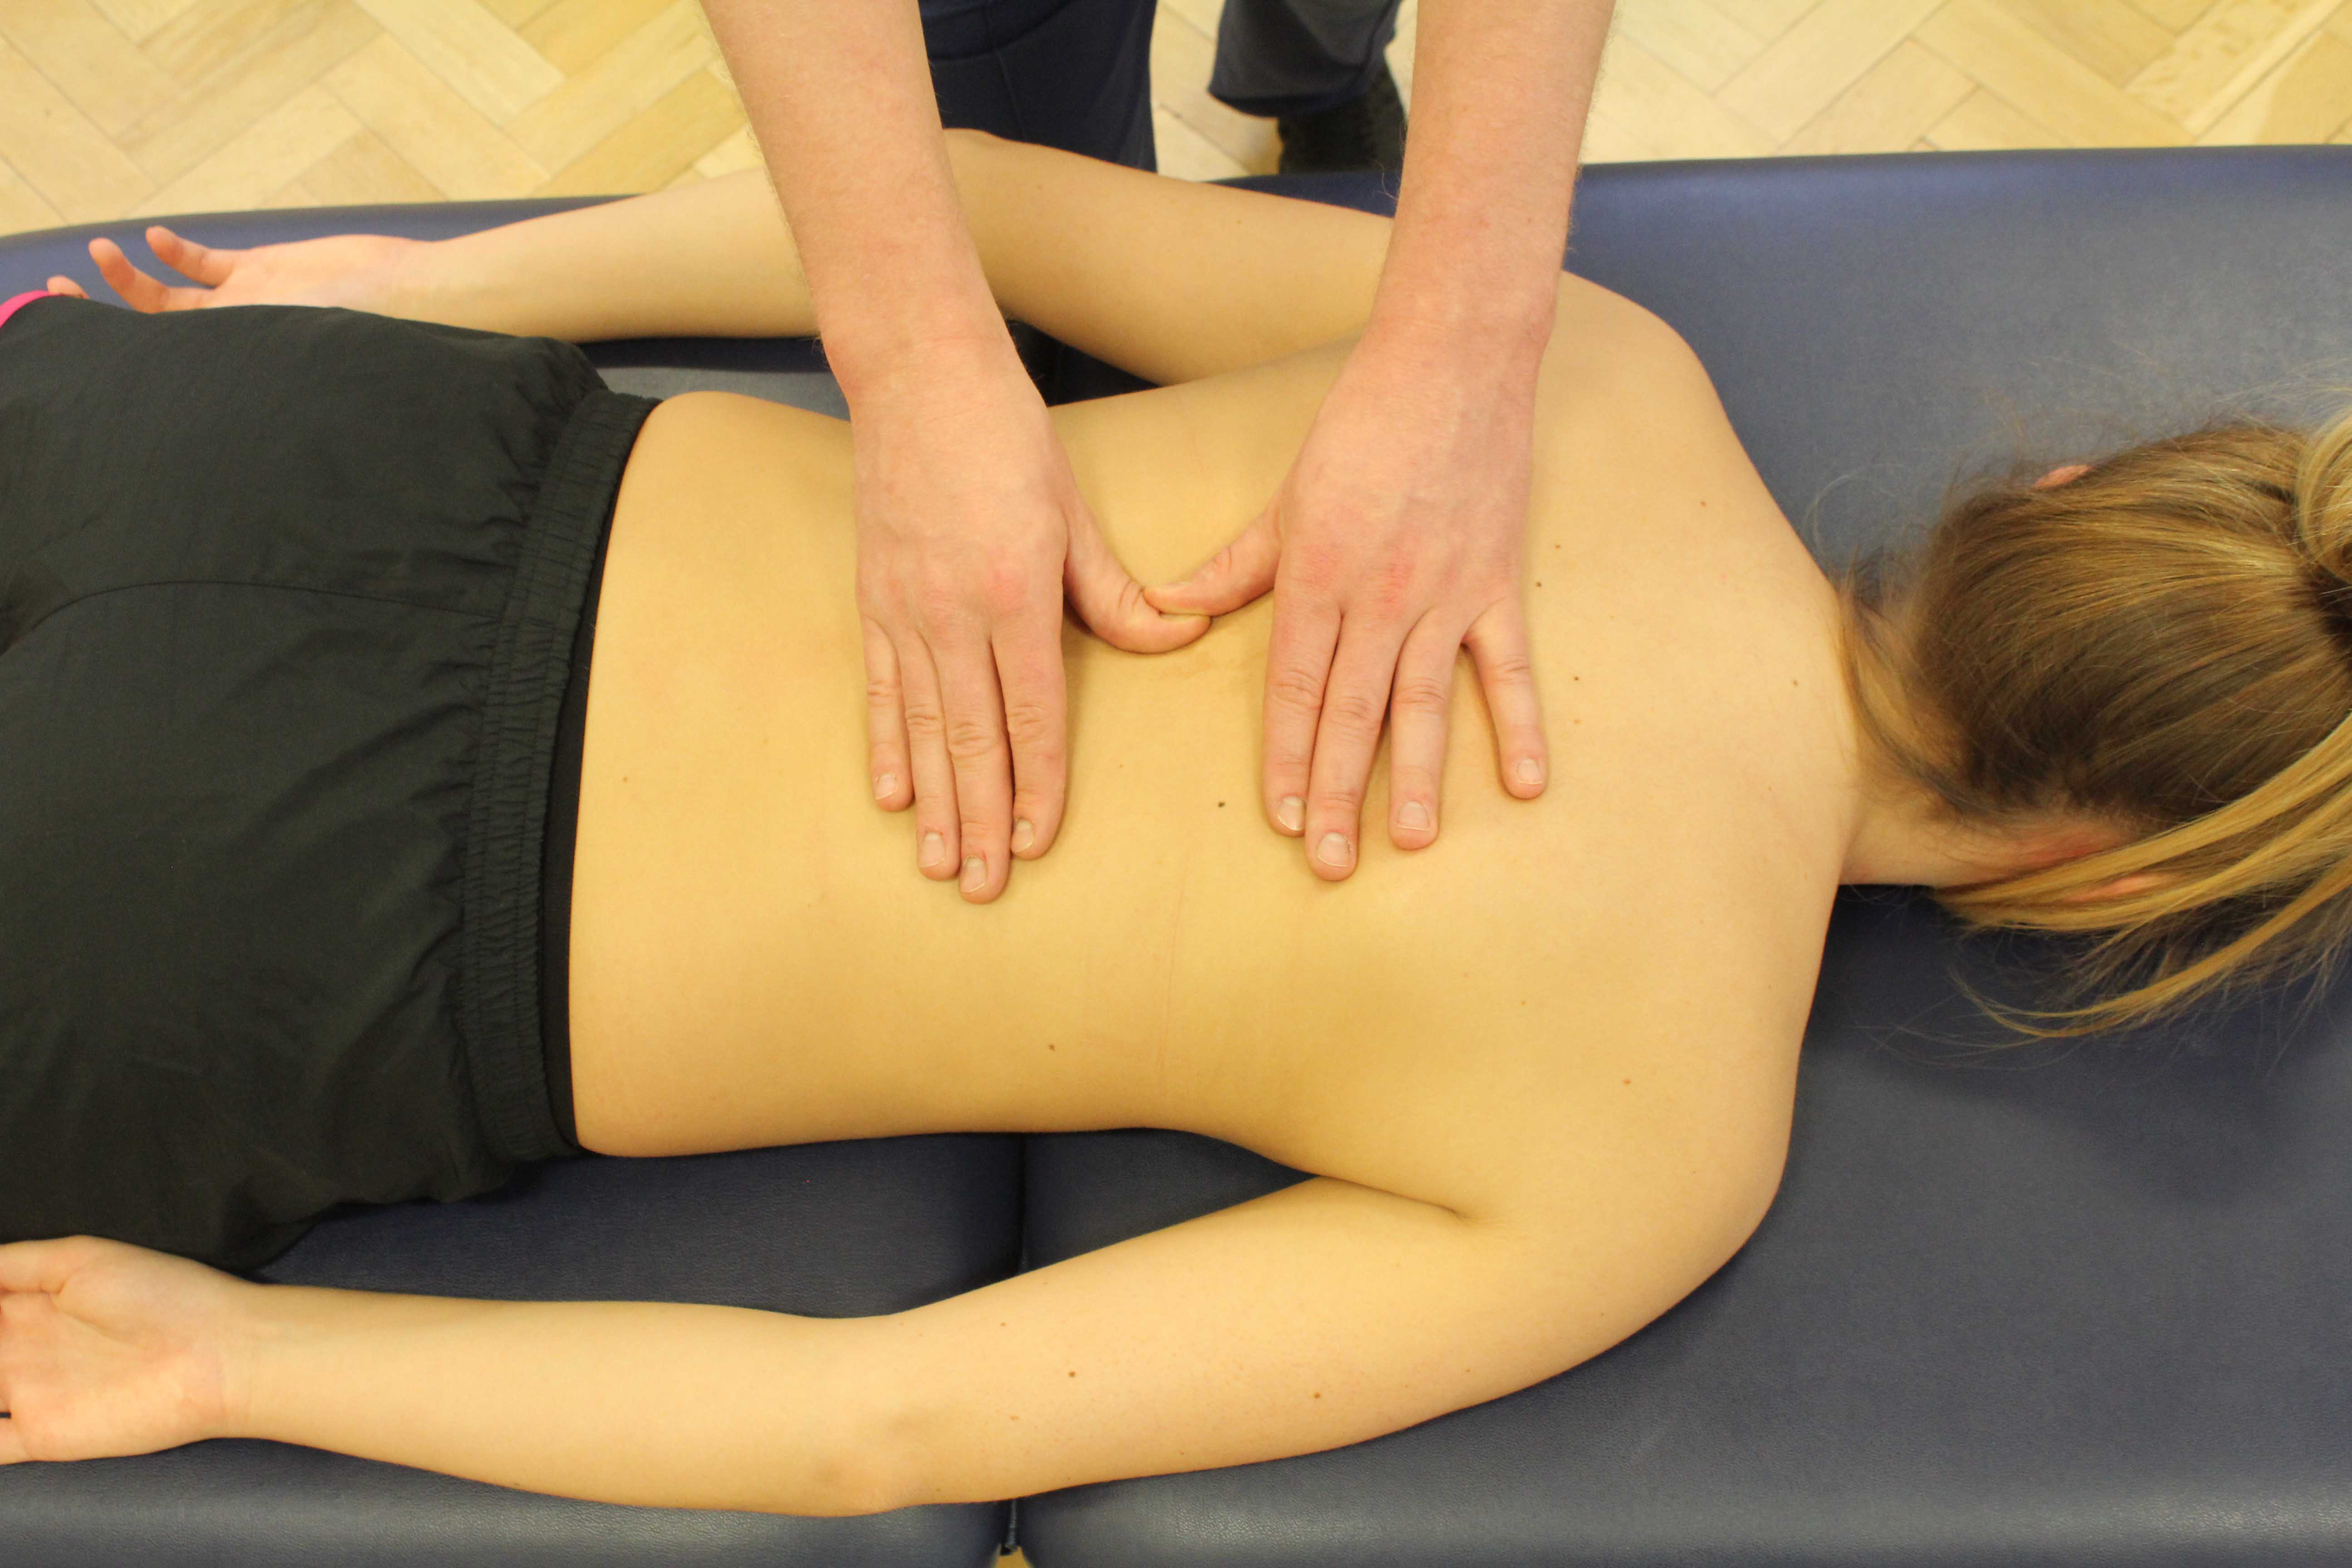 Mobilisations of the mid thoracic spine by experienced physiotherapist